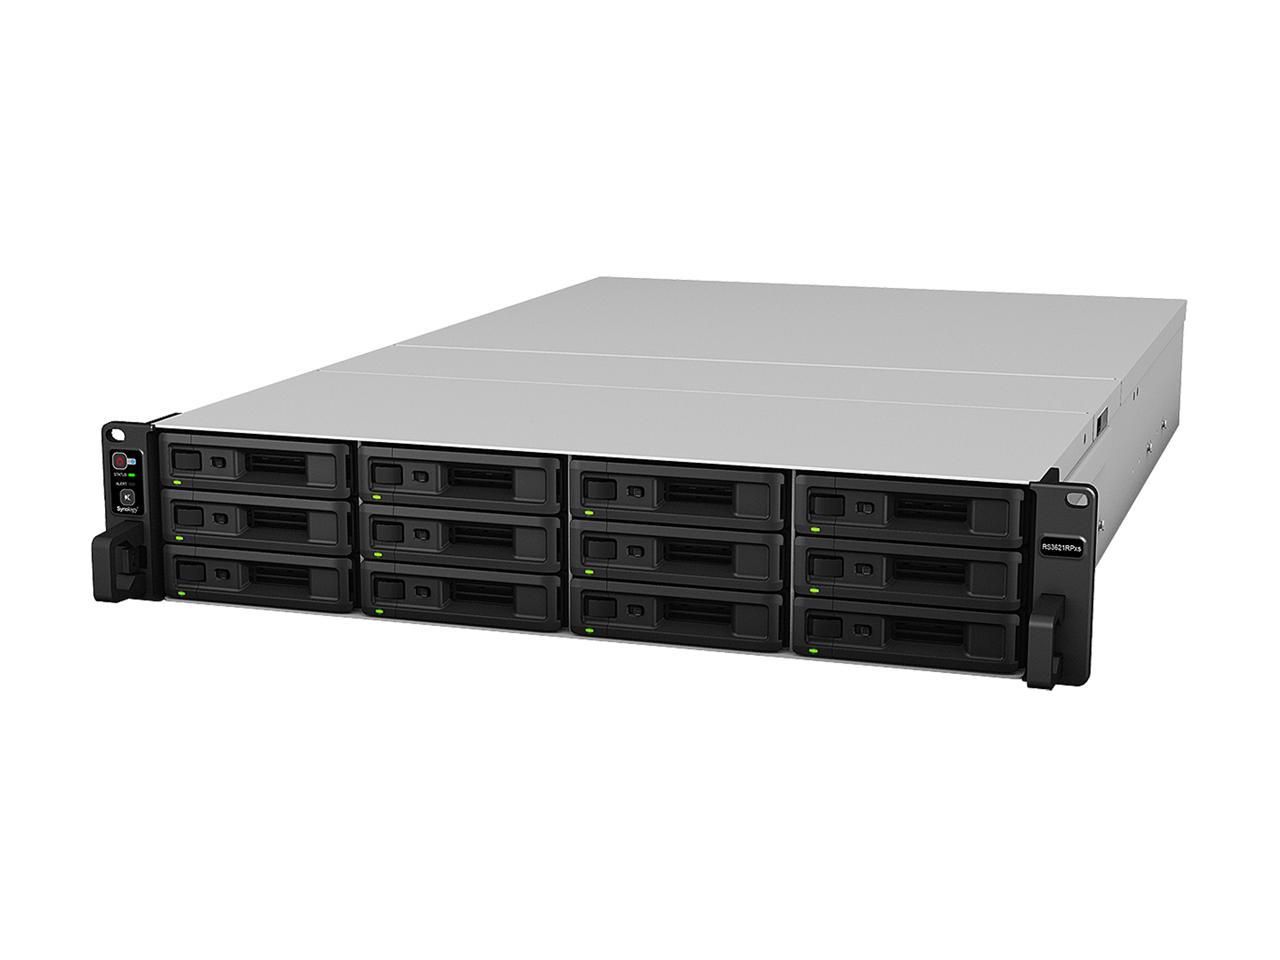 Synology RS3621RPxs RackStation with 32GB RAM, E10G30-T2 10GbE Card, 1.6TB (2x800GB) Cache, RKS-02 Rail Kit & 216TB (12 x 18TB) of Synology Enterprise Drives Fully Assembled and Tested